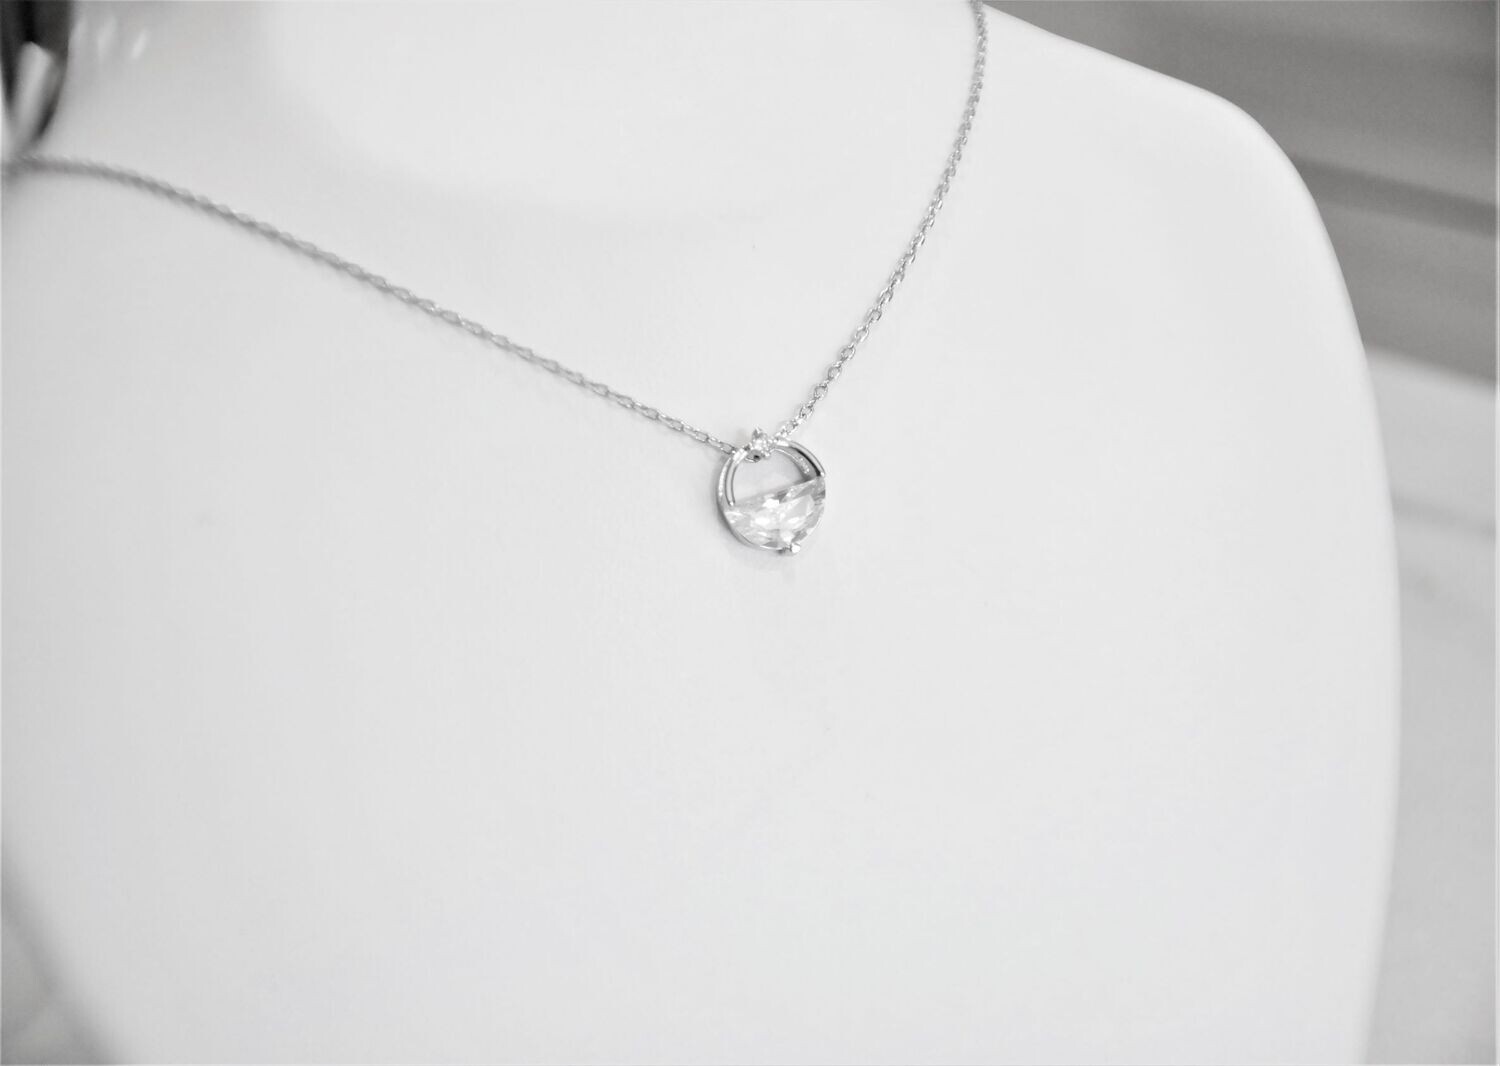 Beautiful trendy 925 sterling silver crystal pendant necklace